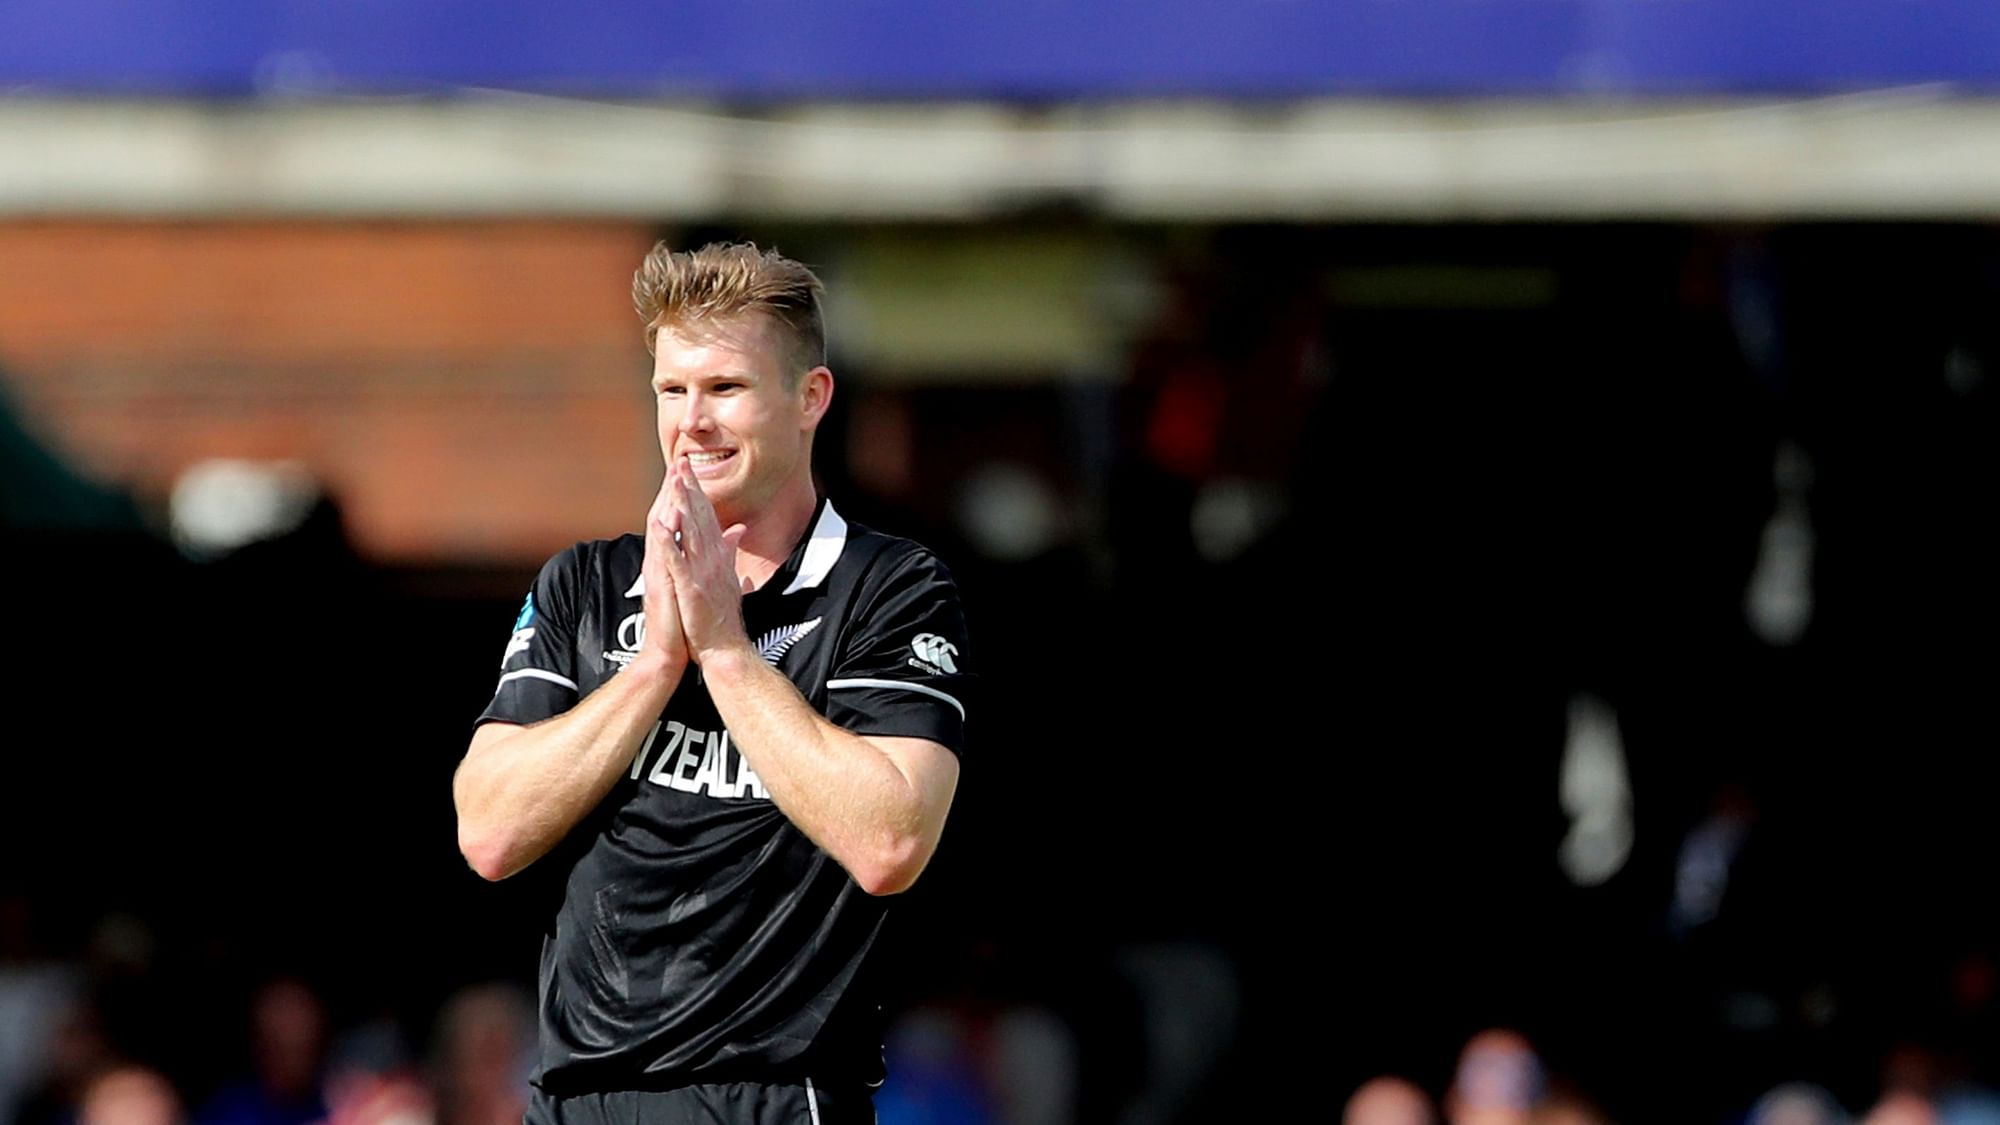 James Neesham has Tweeted that kids should take up baking and not sports!